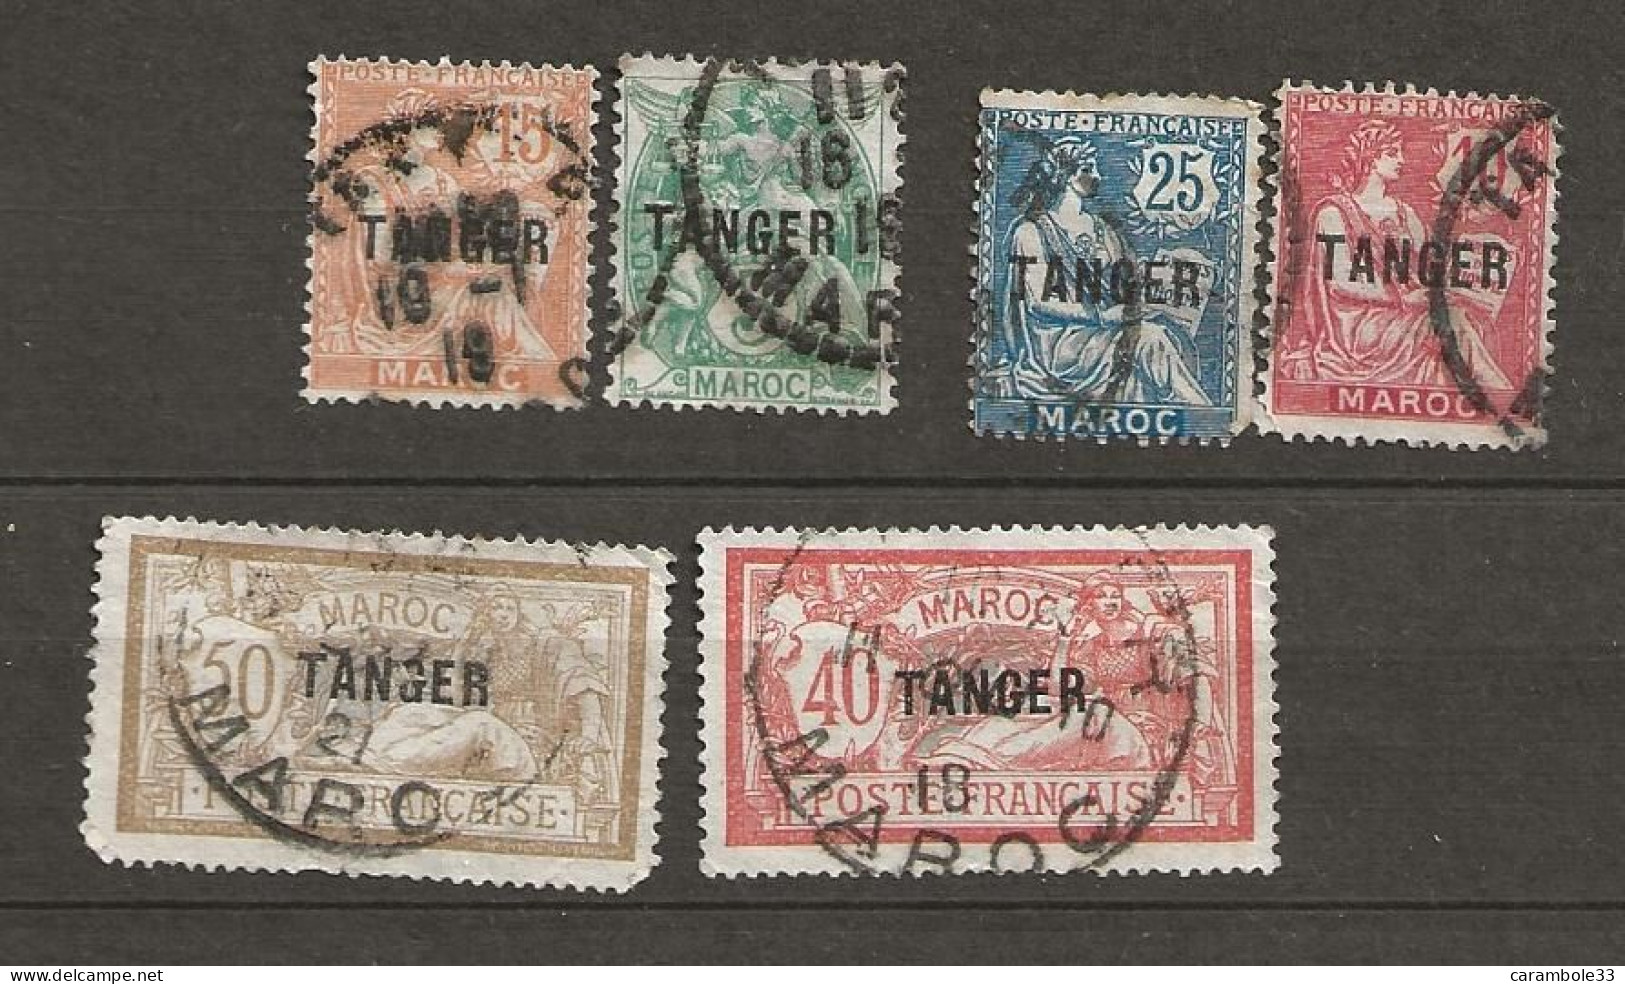 TIMBRE  MAROC  Surcharge TANGER  (1507) - Usati